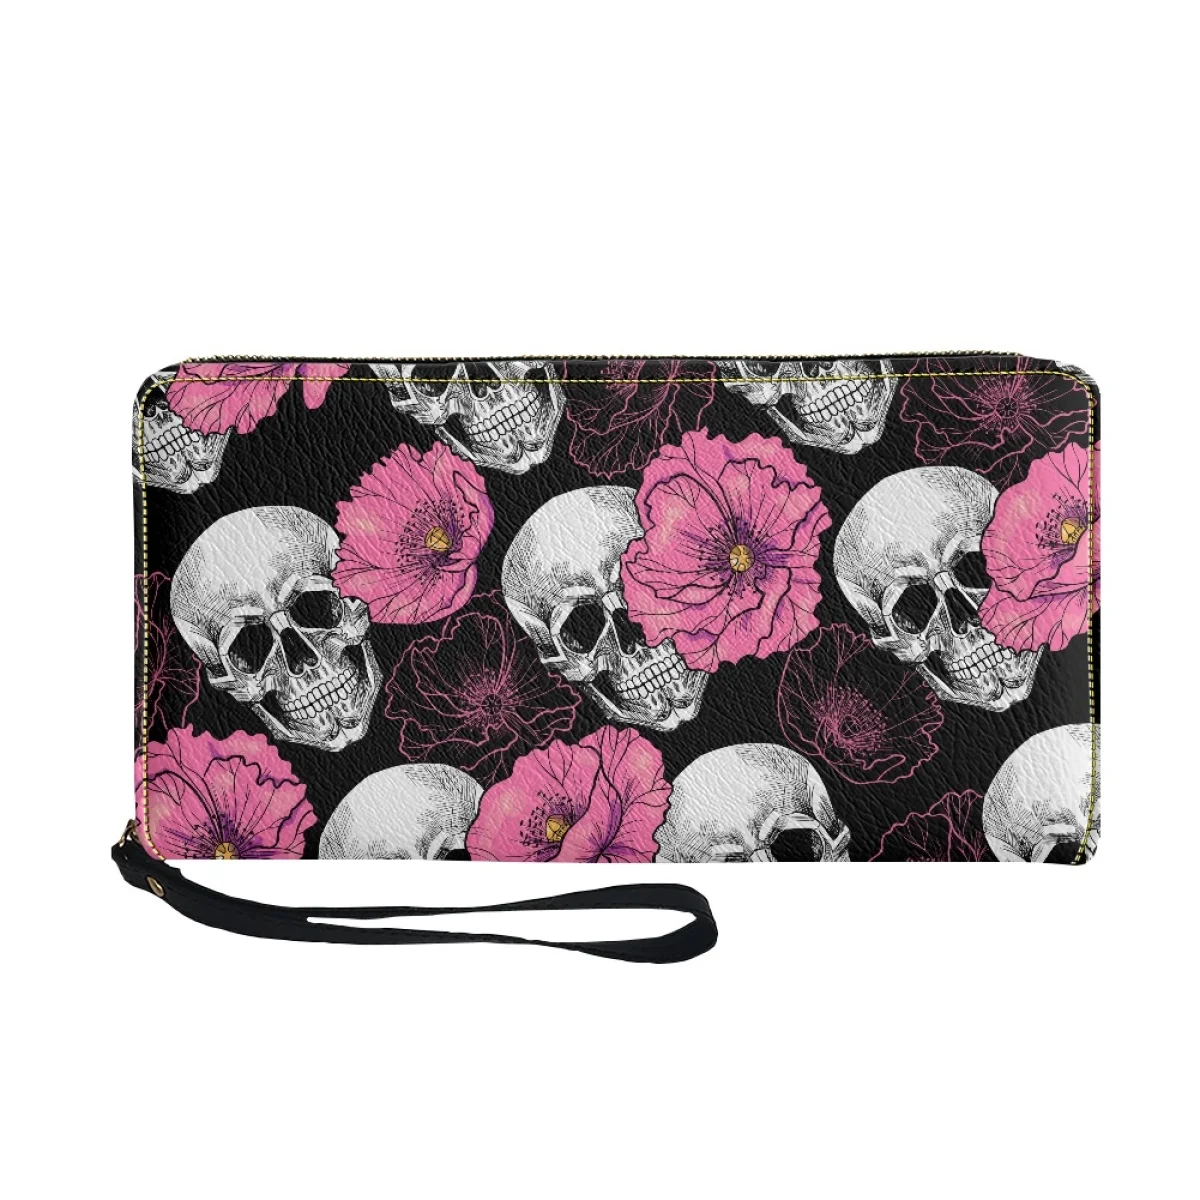 Skull Rose Print Women Luxury Wallets Famous Brands Pu Leather Lightweight With StrapSlim Phone Bag Carteras Para Mujer